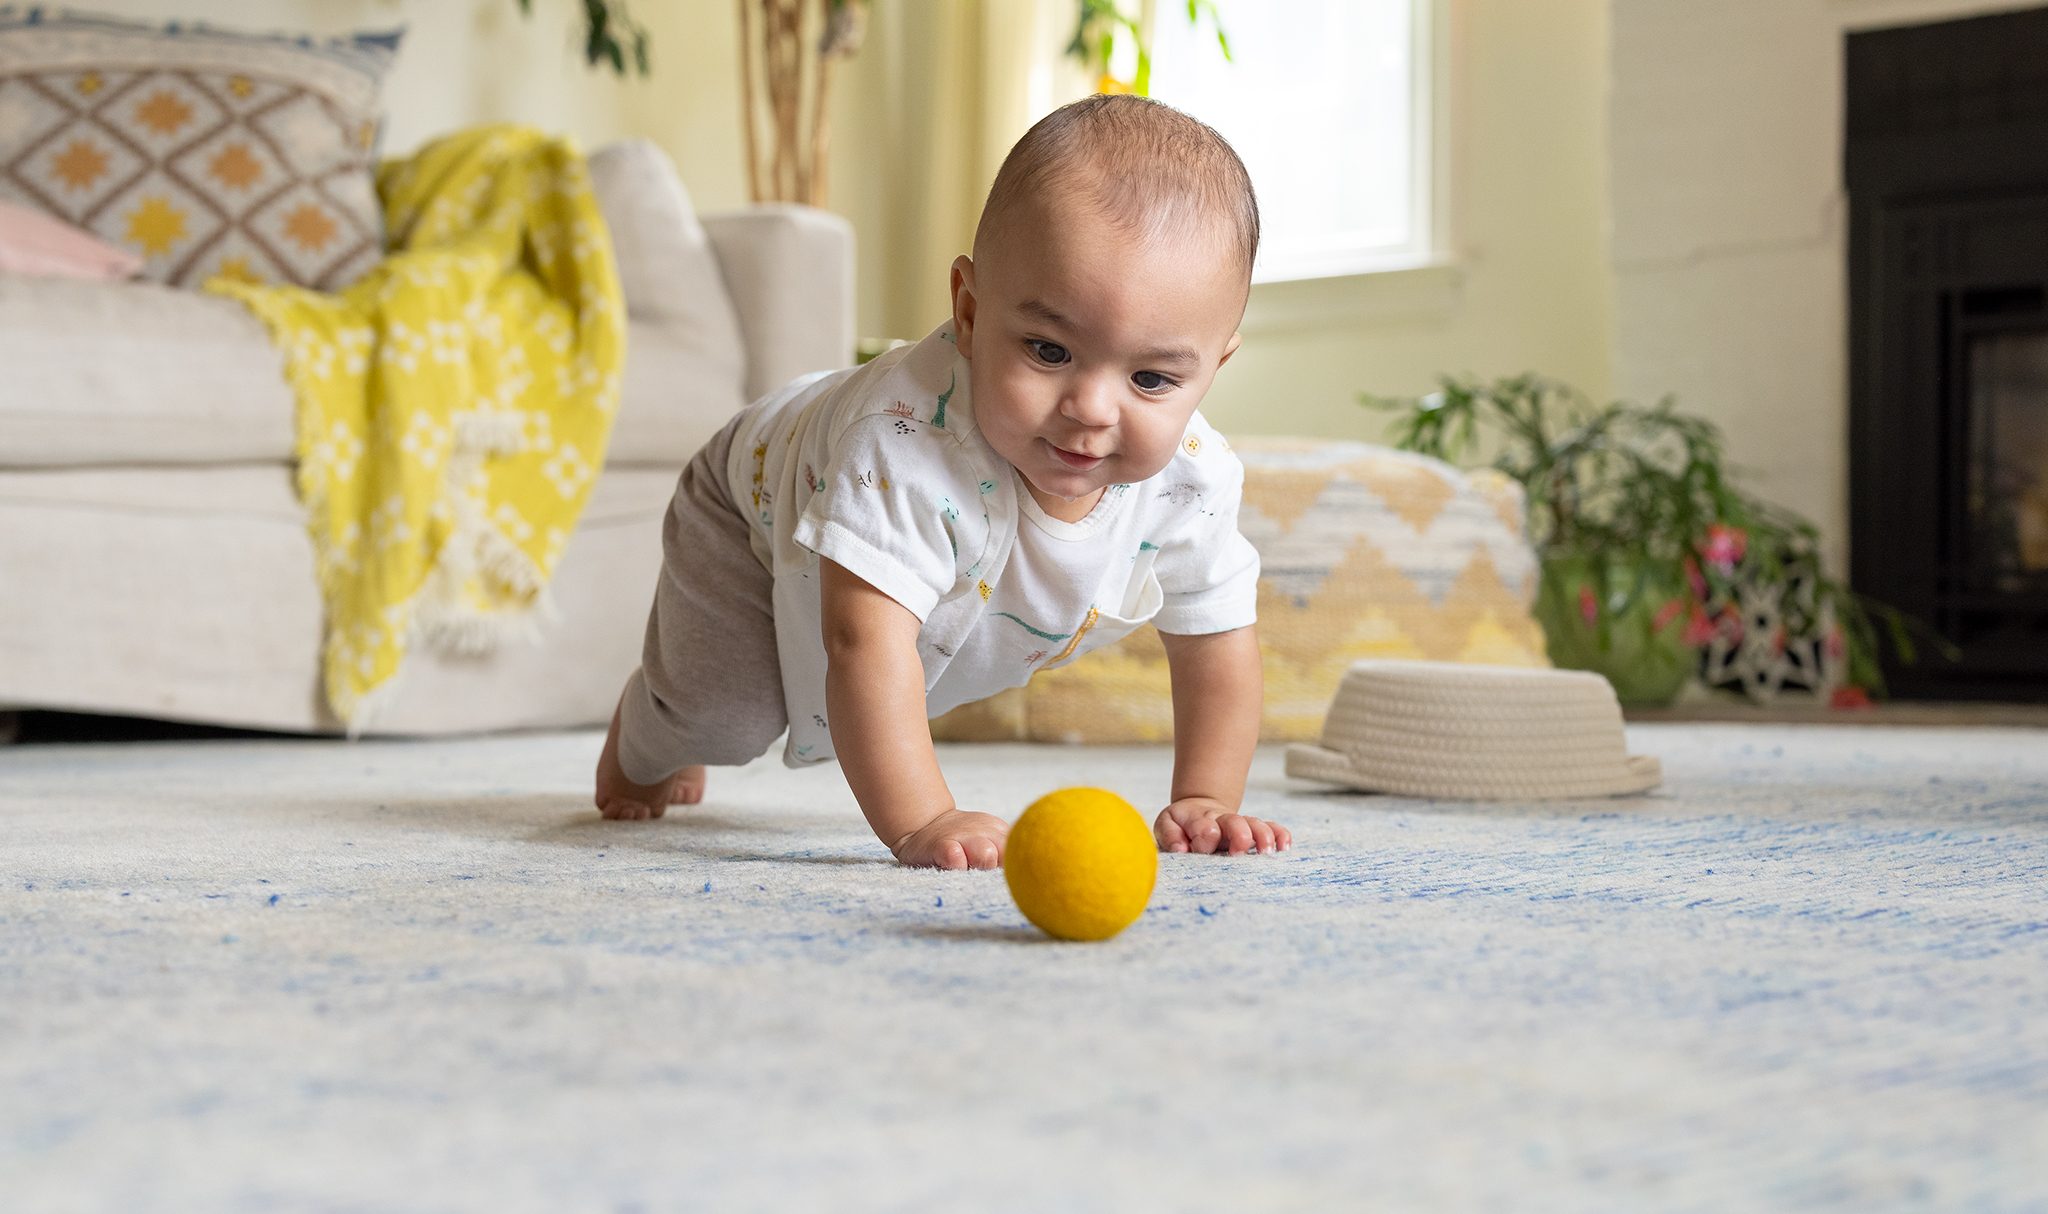 3 tips to encourage crawling